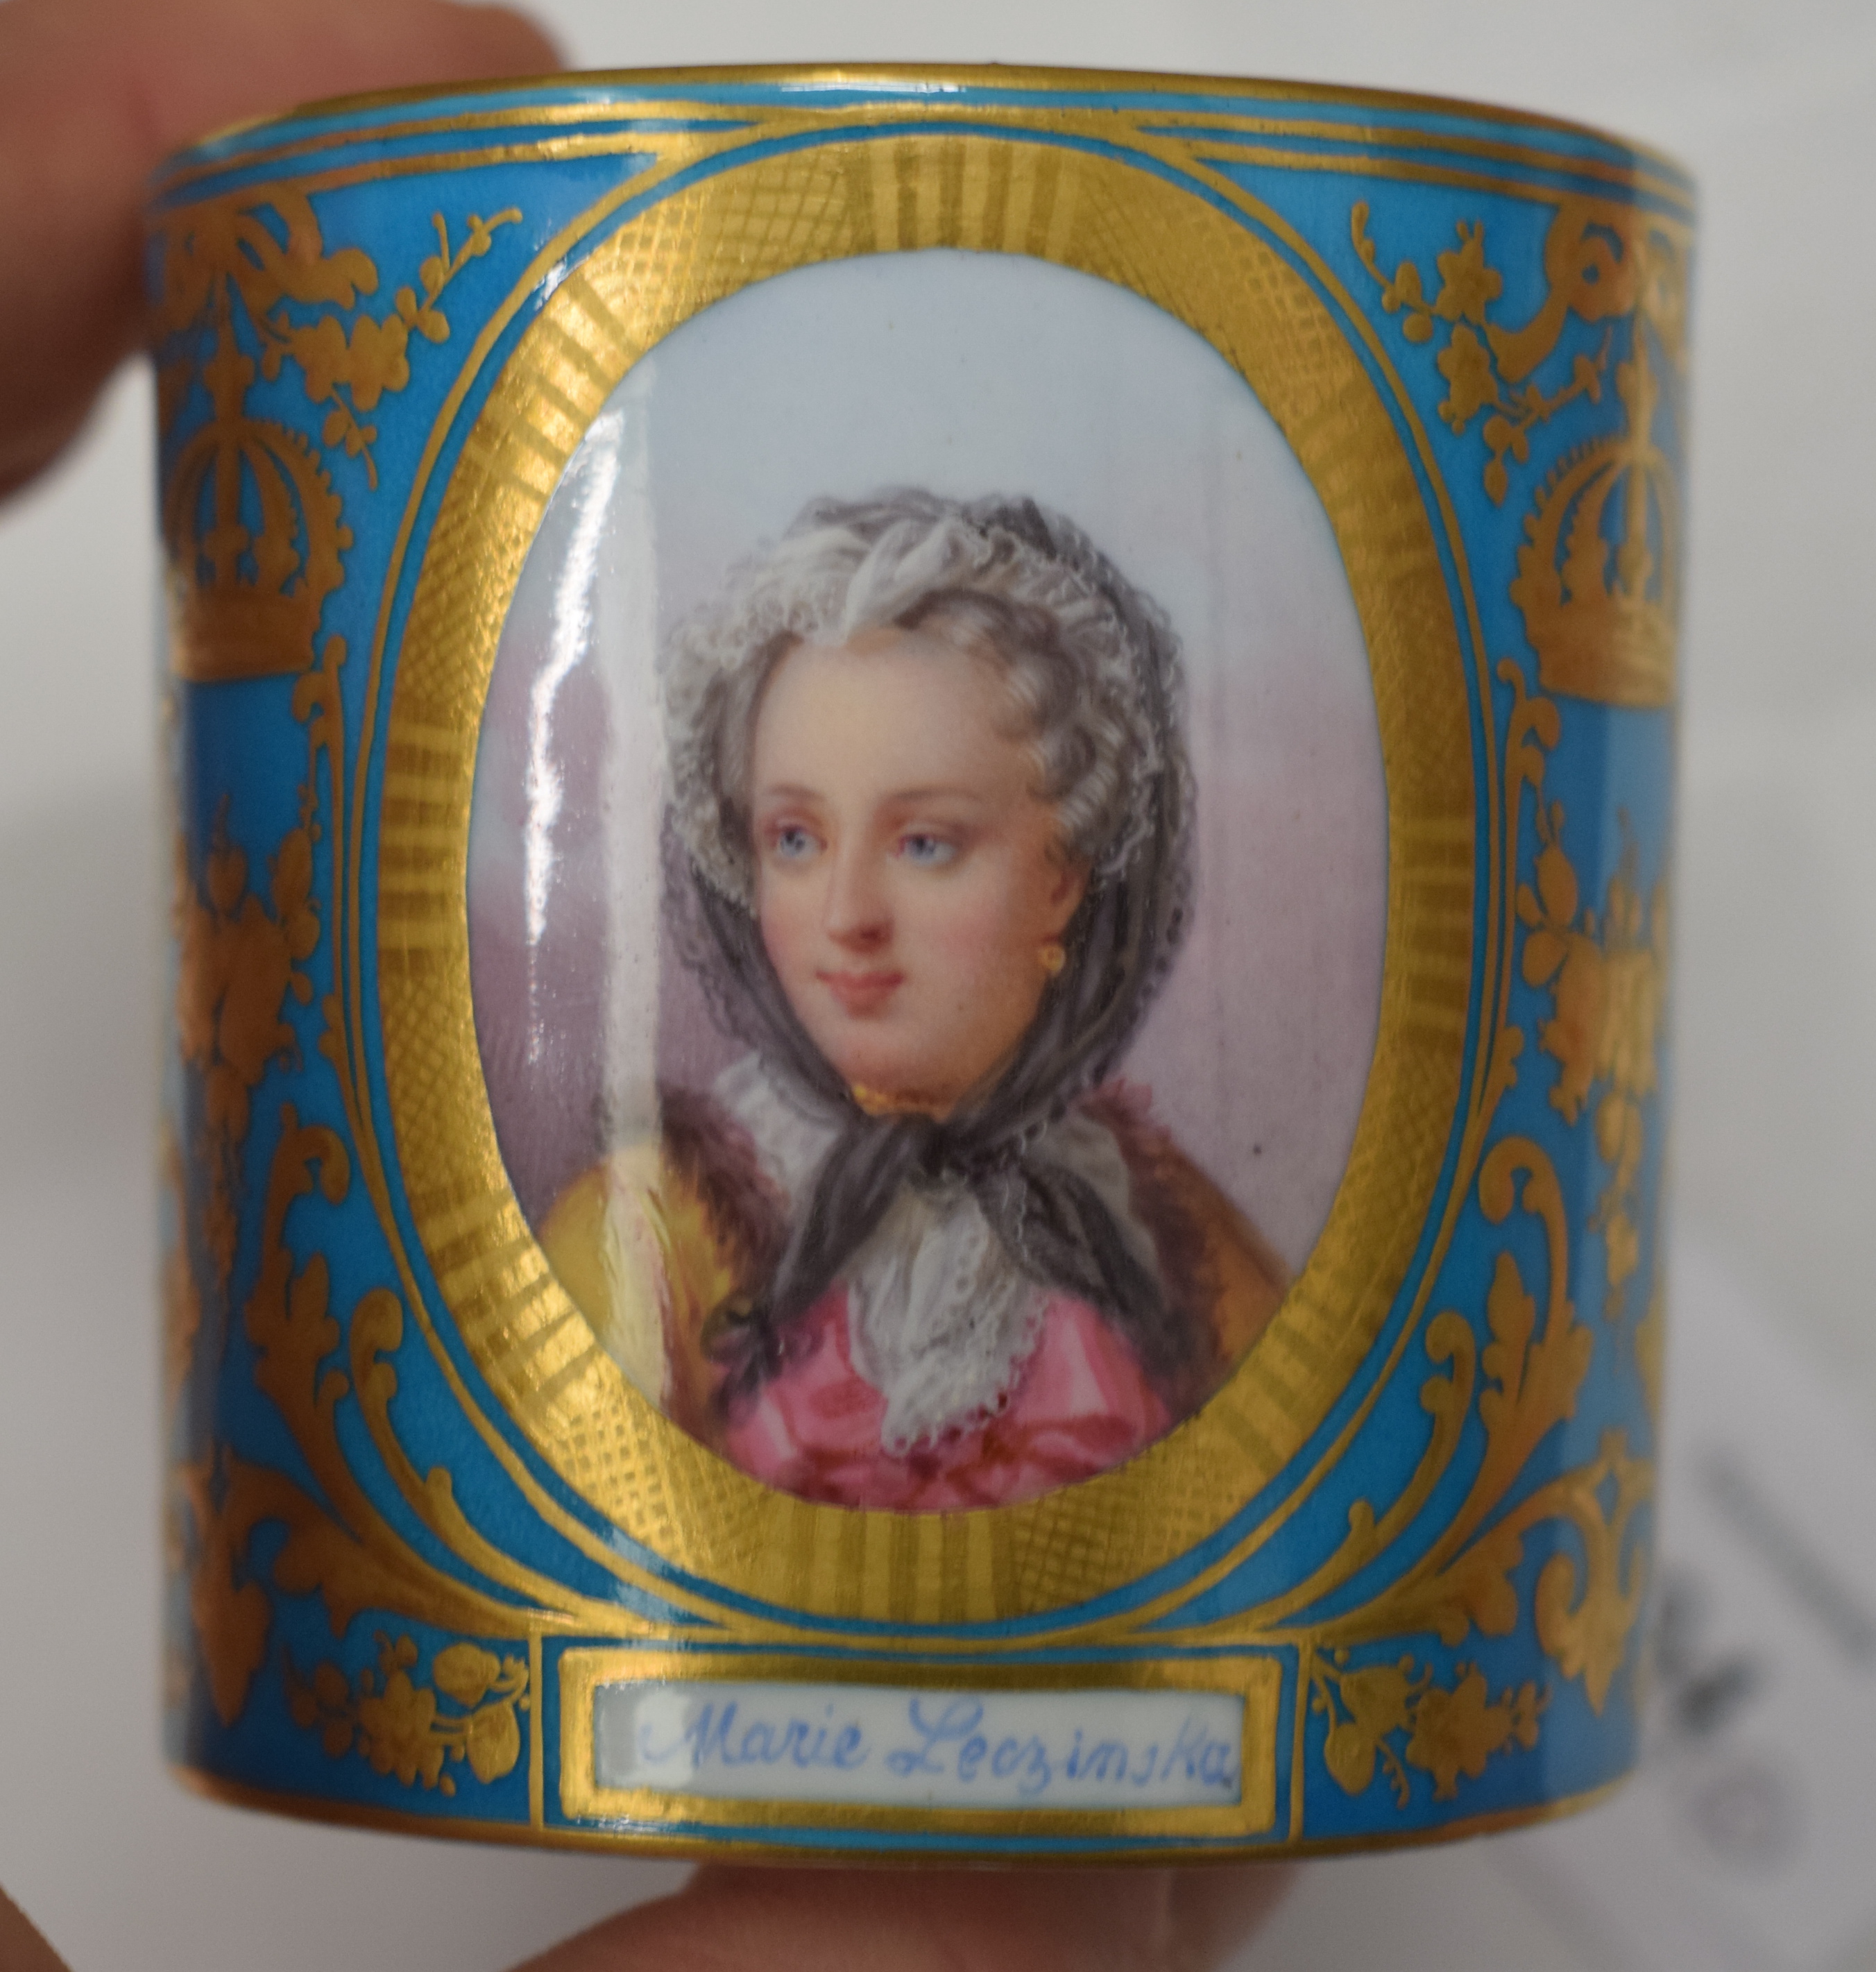 A FINE 19TH CENTURY SEVRES PORCELAIN CABINET CUP AND SAUCER painted with portraits and bands of foli - Image 14 of 20